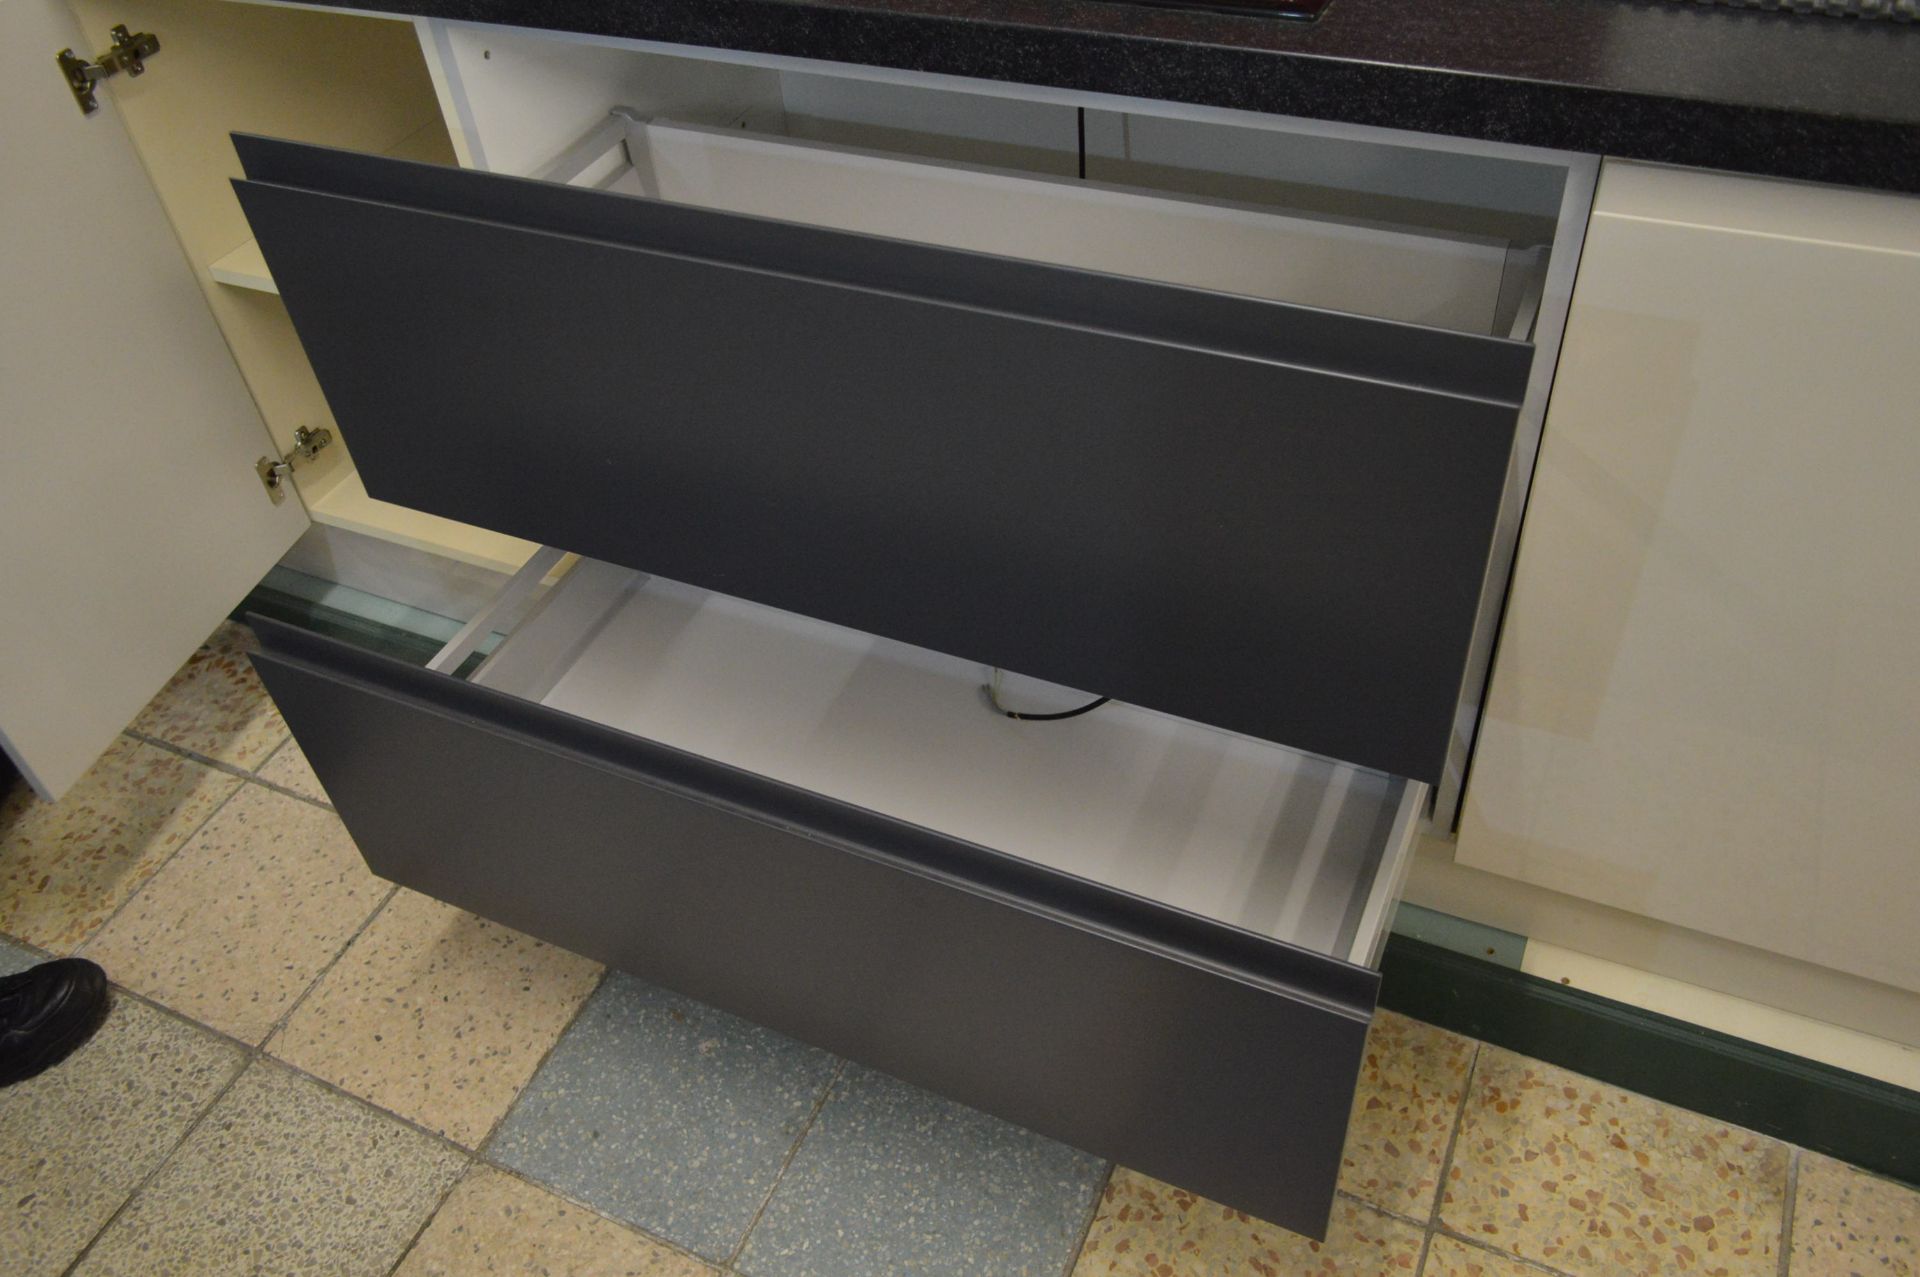 LUCENTE STONE/ ANTHRACITE KITCHEN, approx. 4.6m ru - Image 5 of 8